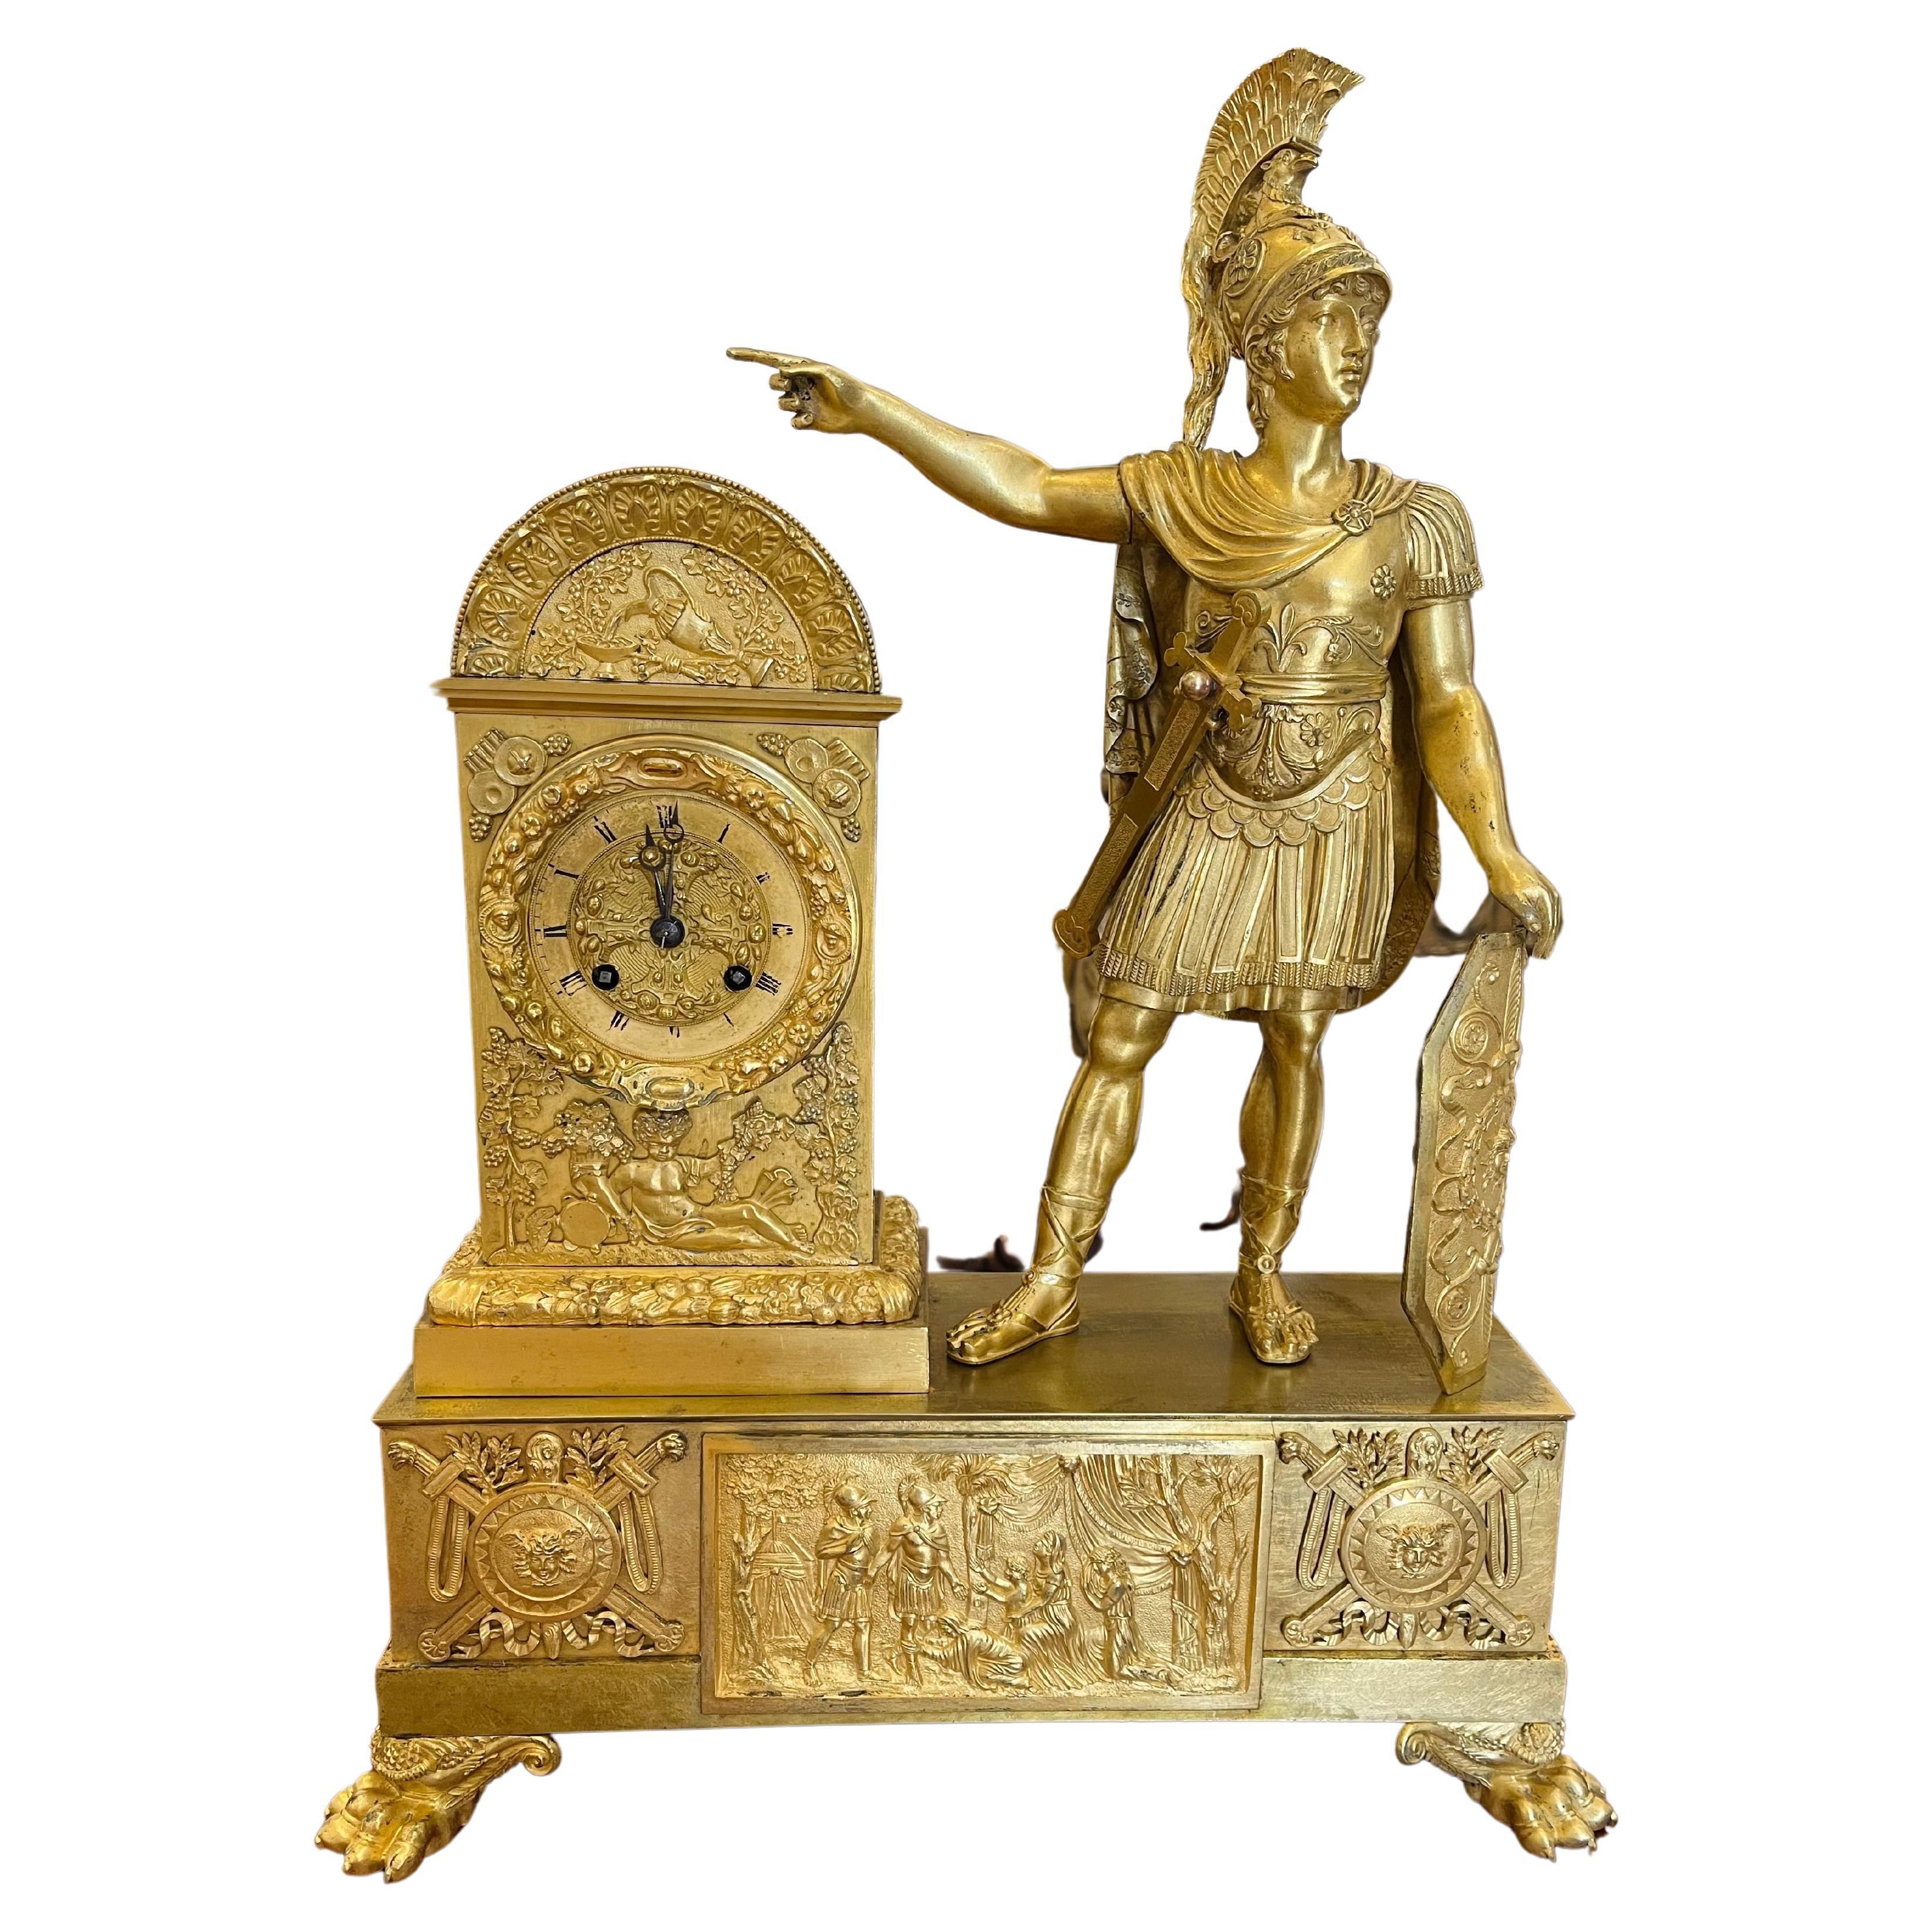 Period French Empire ormolu or gilt bronze clock. Neoclassical motif of Roman Soldier with wonderful and rare cornucopia and lion feet. Plaques of Roman scenes. Robust and dramatic.